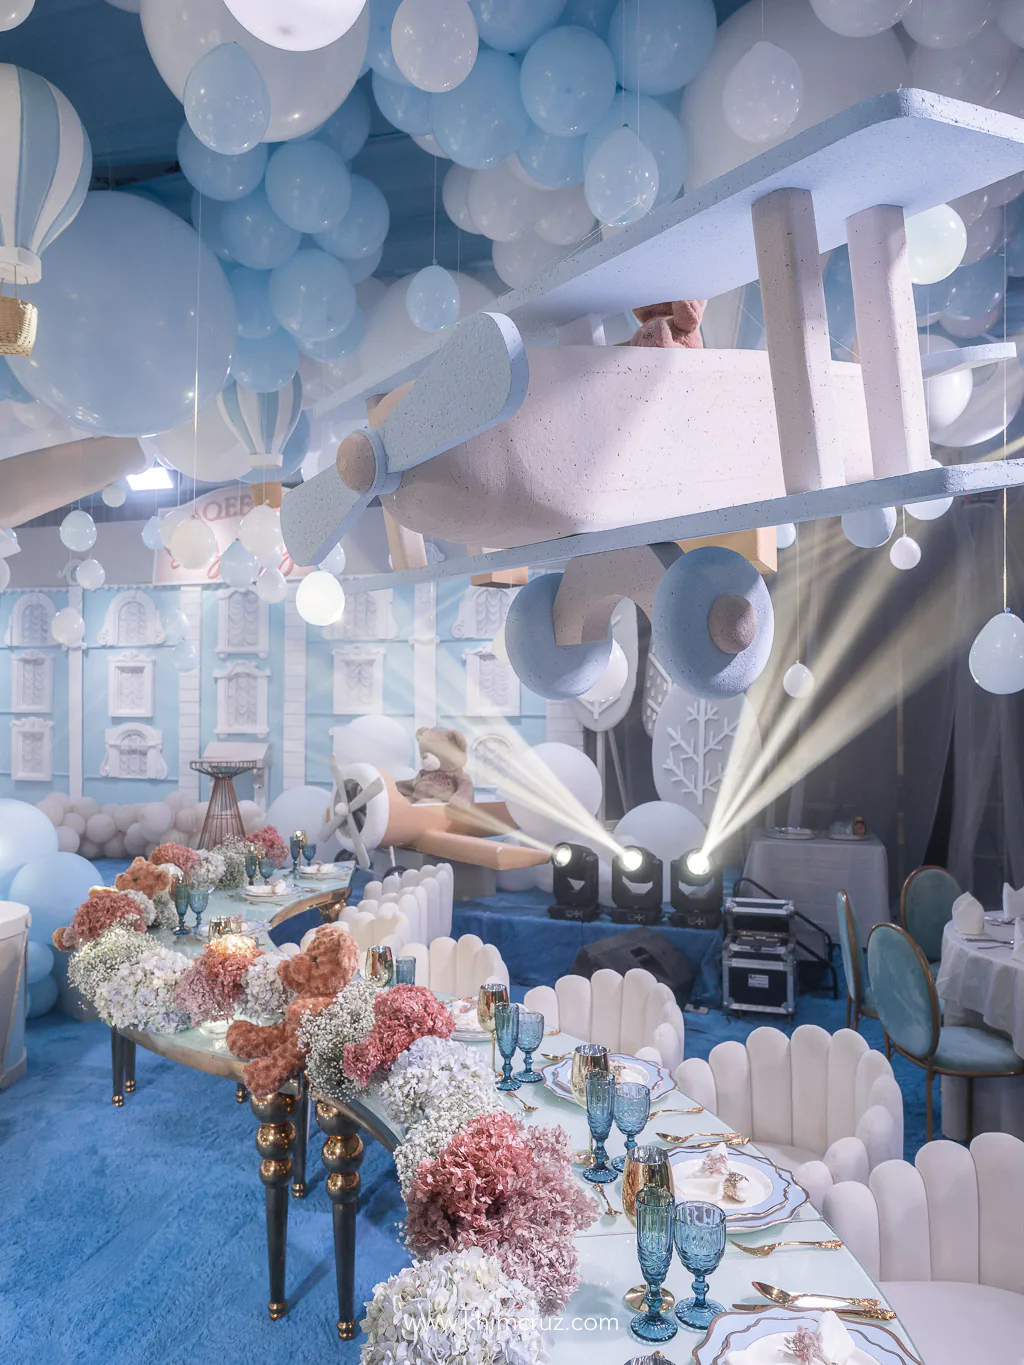 hanging toy plane and balloons over tables with florals